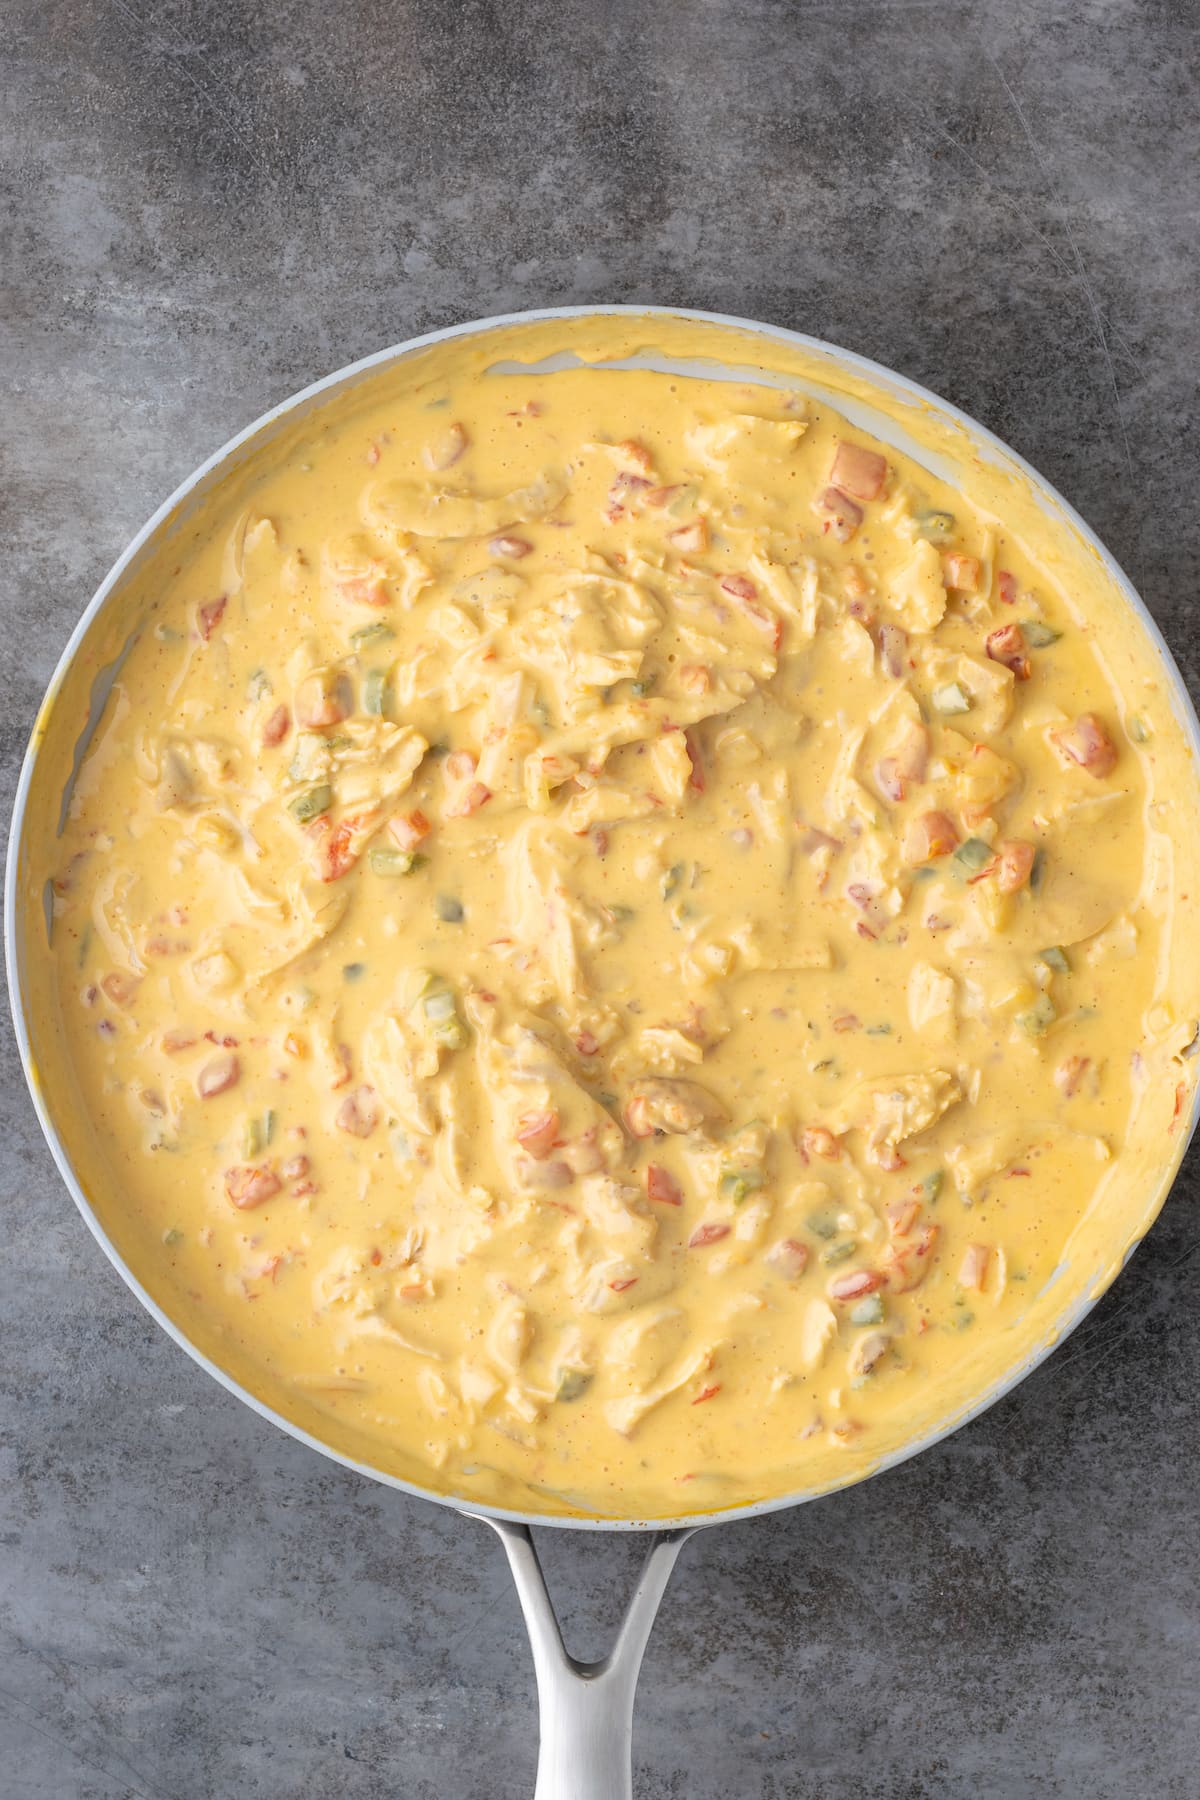 Mixing chicken into cheesy sauce in a skillet